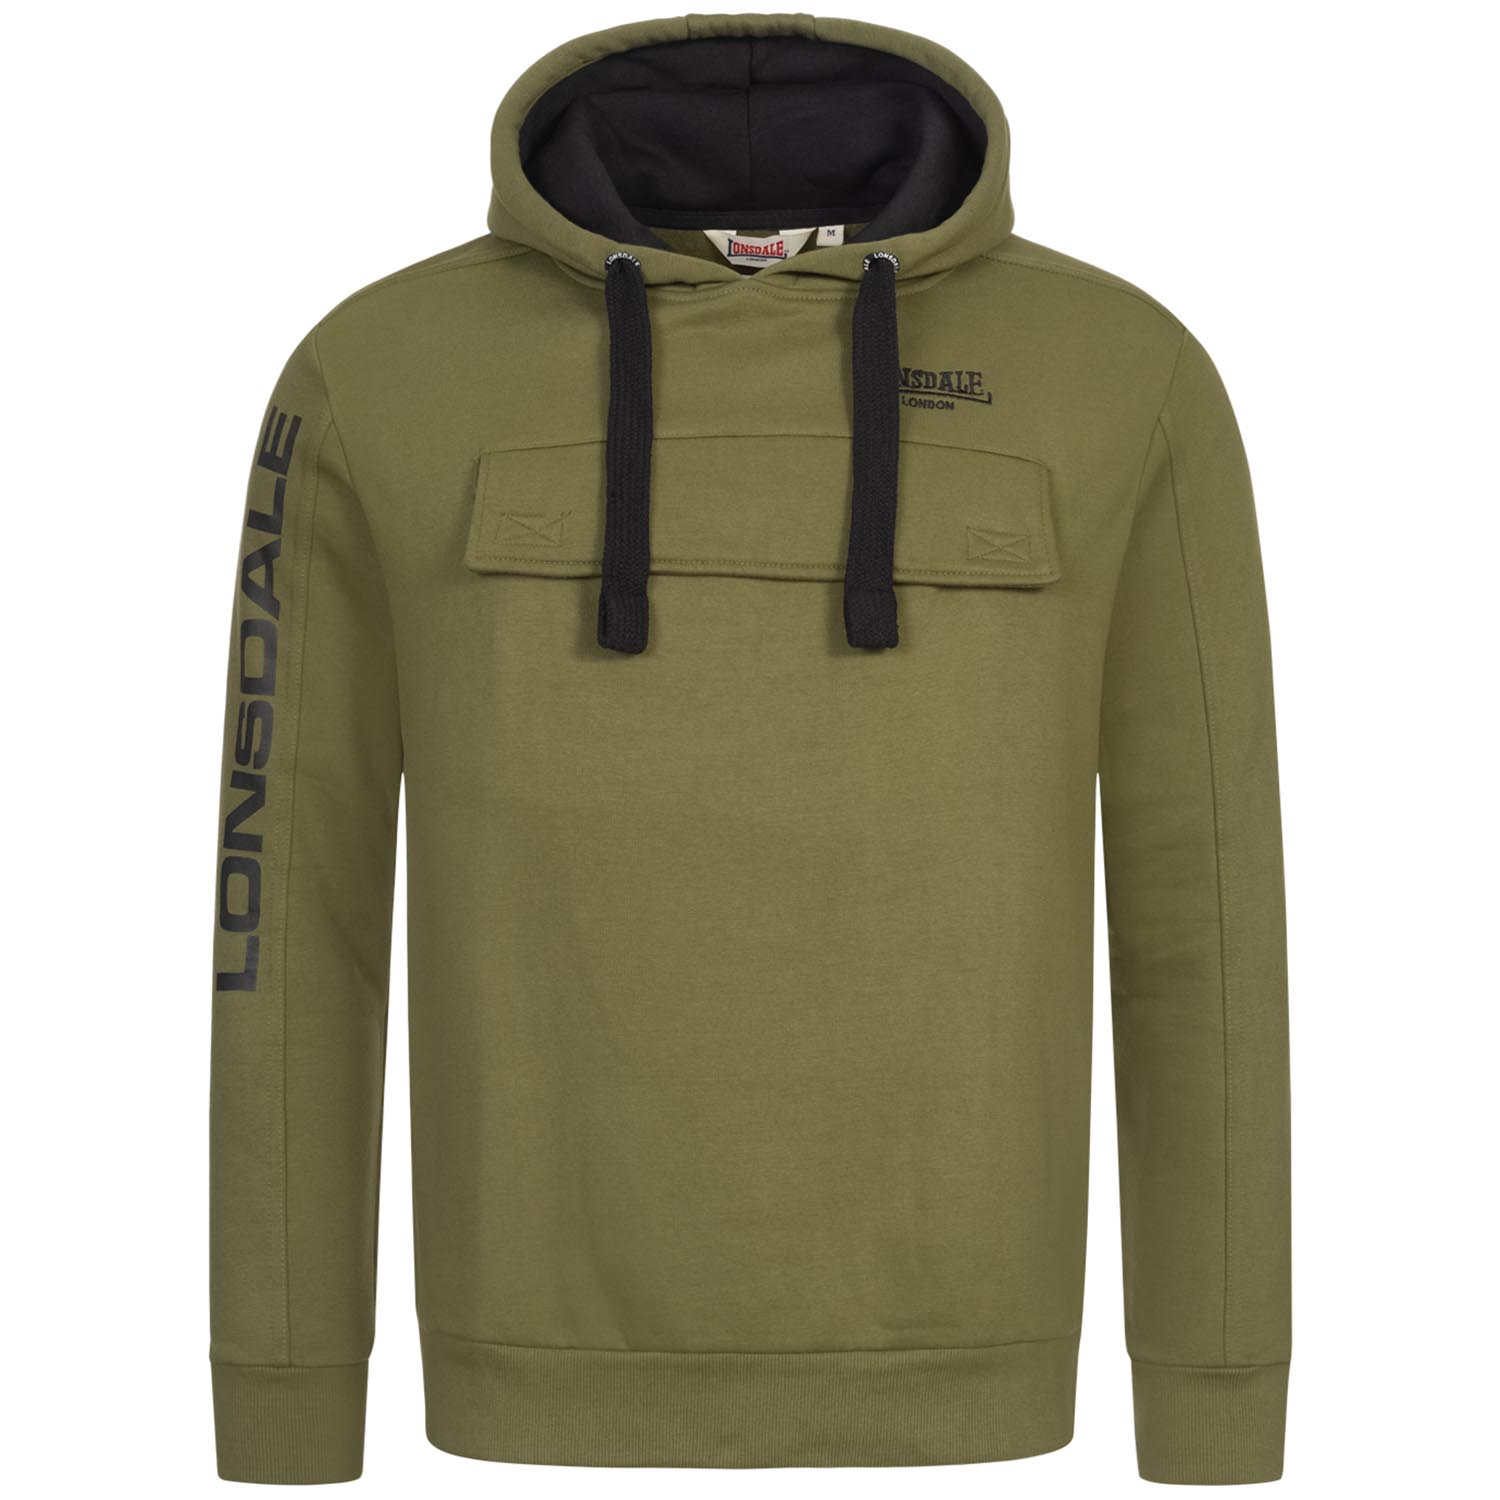 Lonsdale Hoody, Rushen, olive, XL